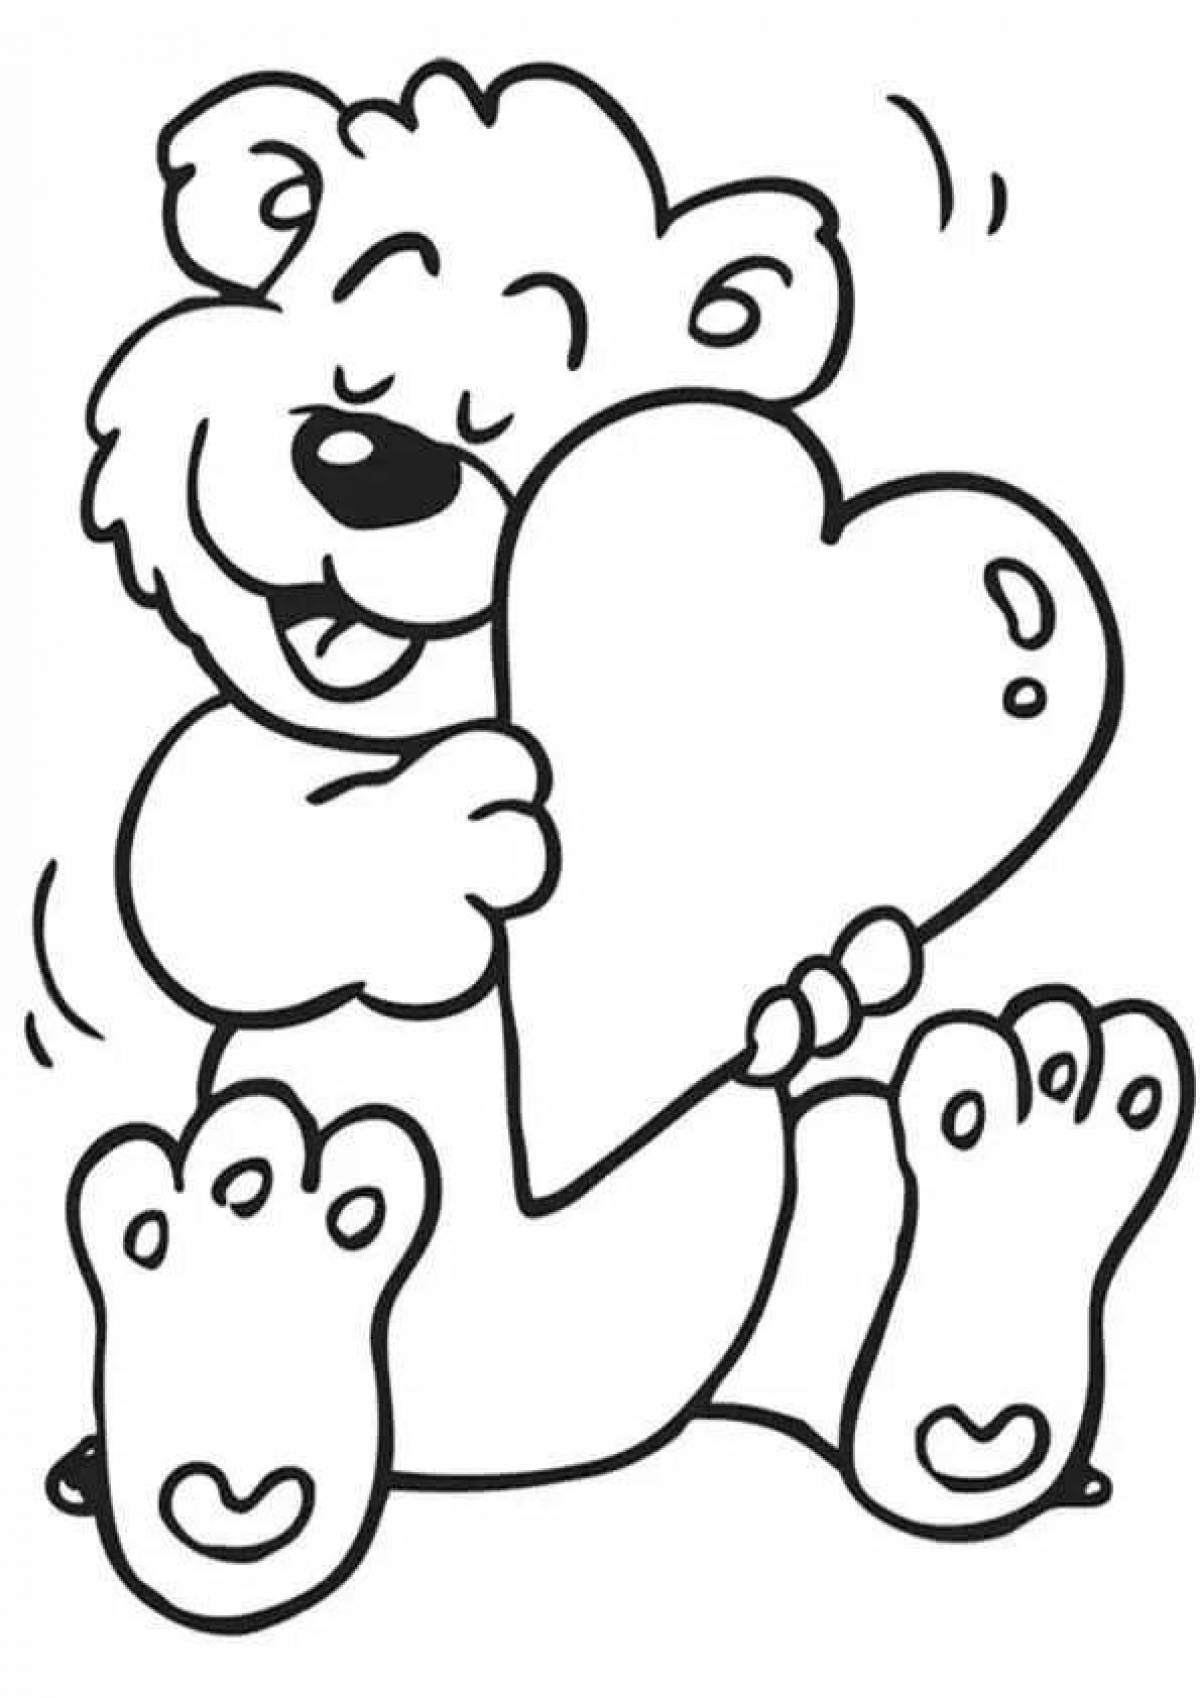 Coloring book cheerful teddy bear with a heart